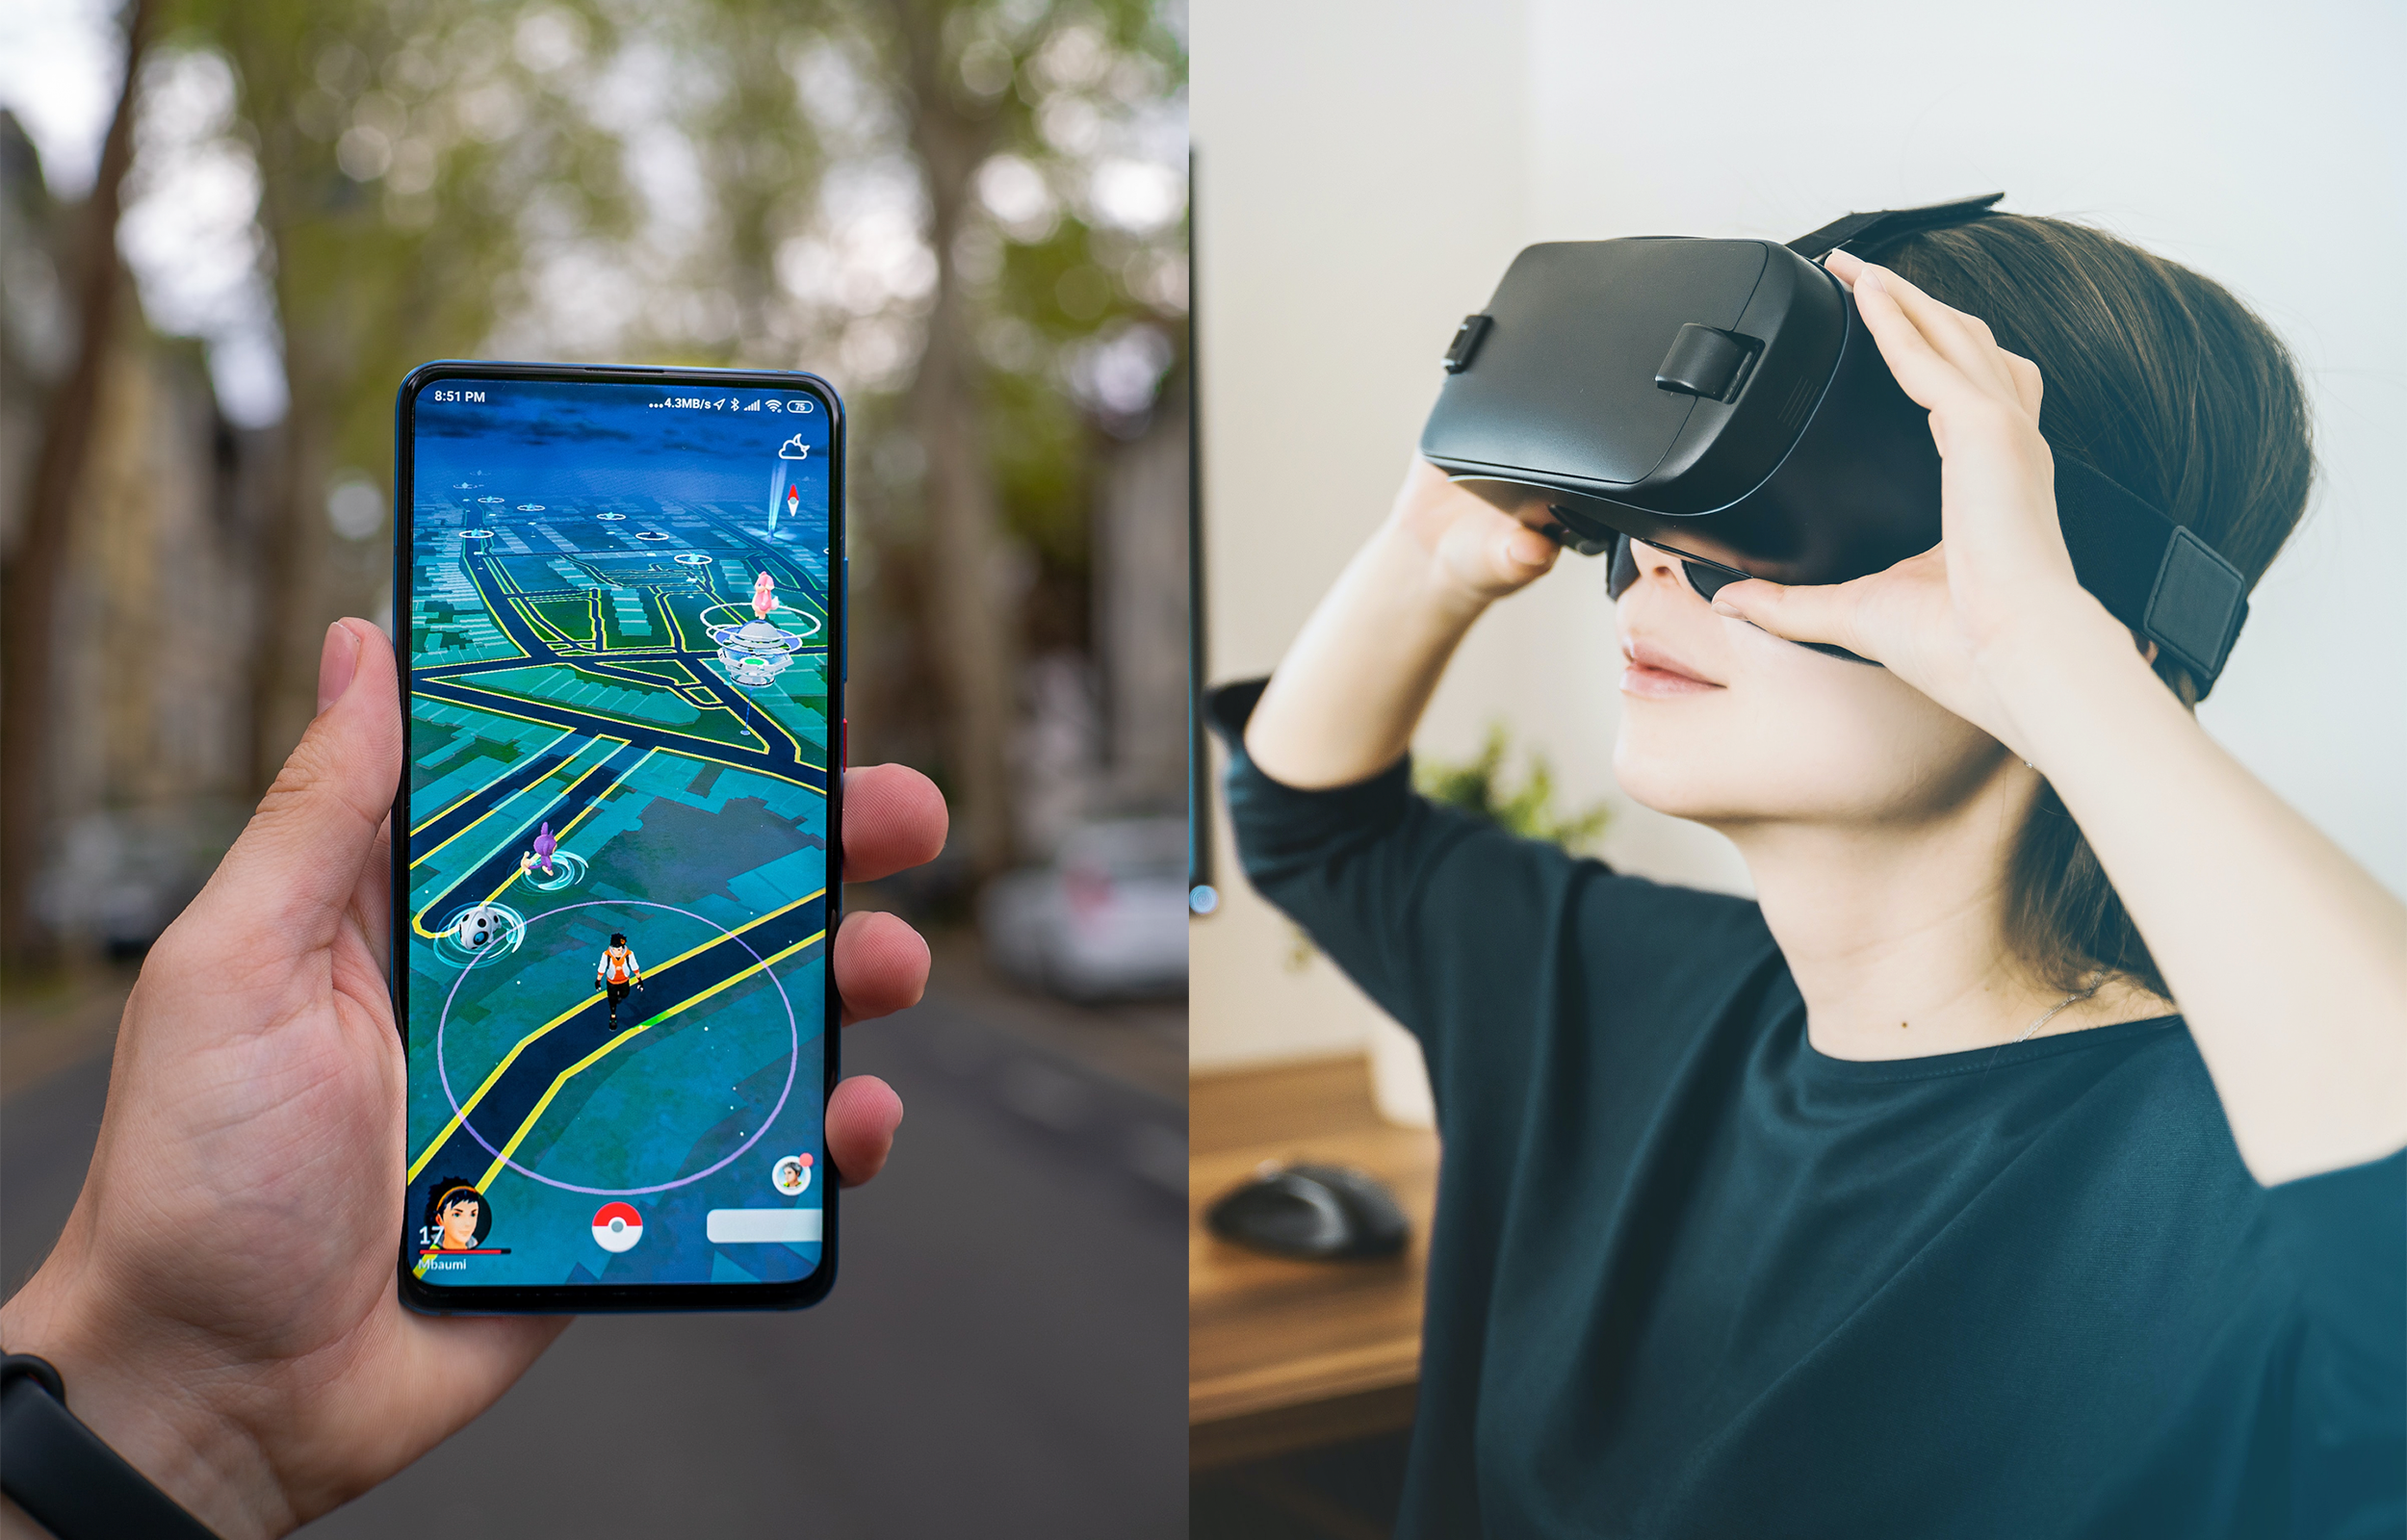 Smartphone showing a mobile AR app, and Woman wearing a VR headset, two sides of the virtuality spectrum.